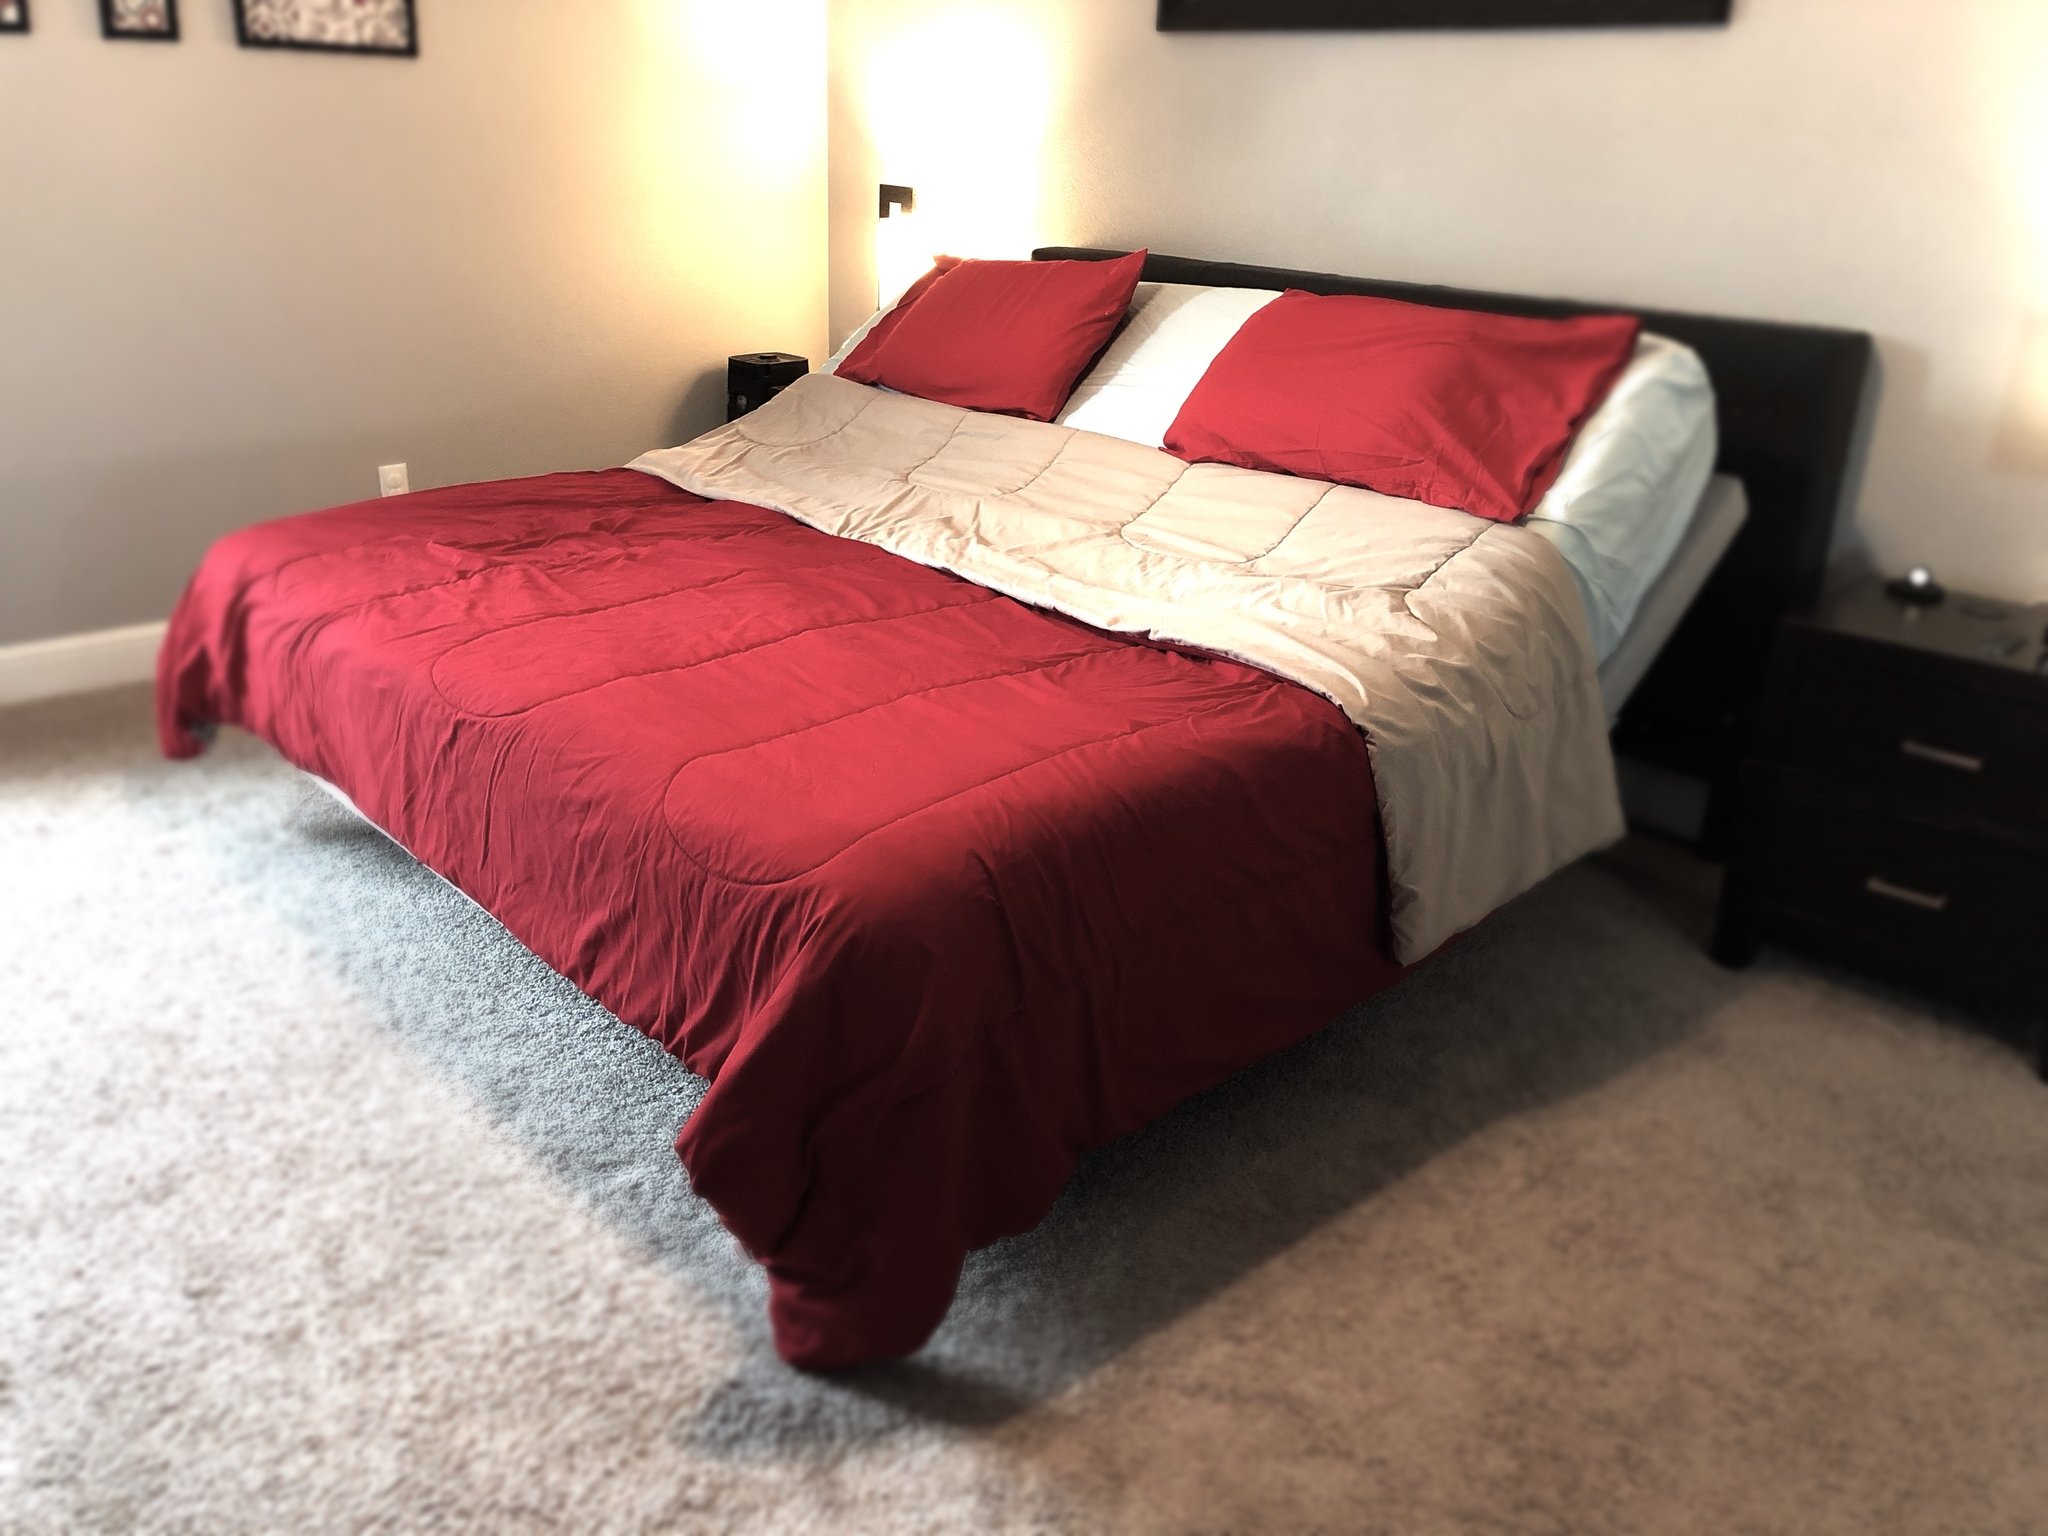 Malouf M555 Adjustable Bed Base Review, How To Raise An Adjustable Bed Frame